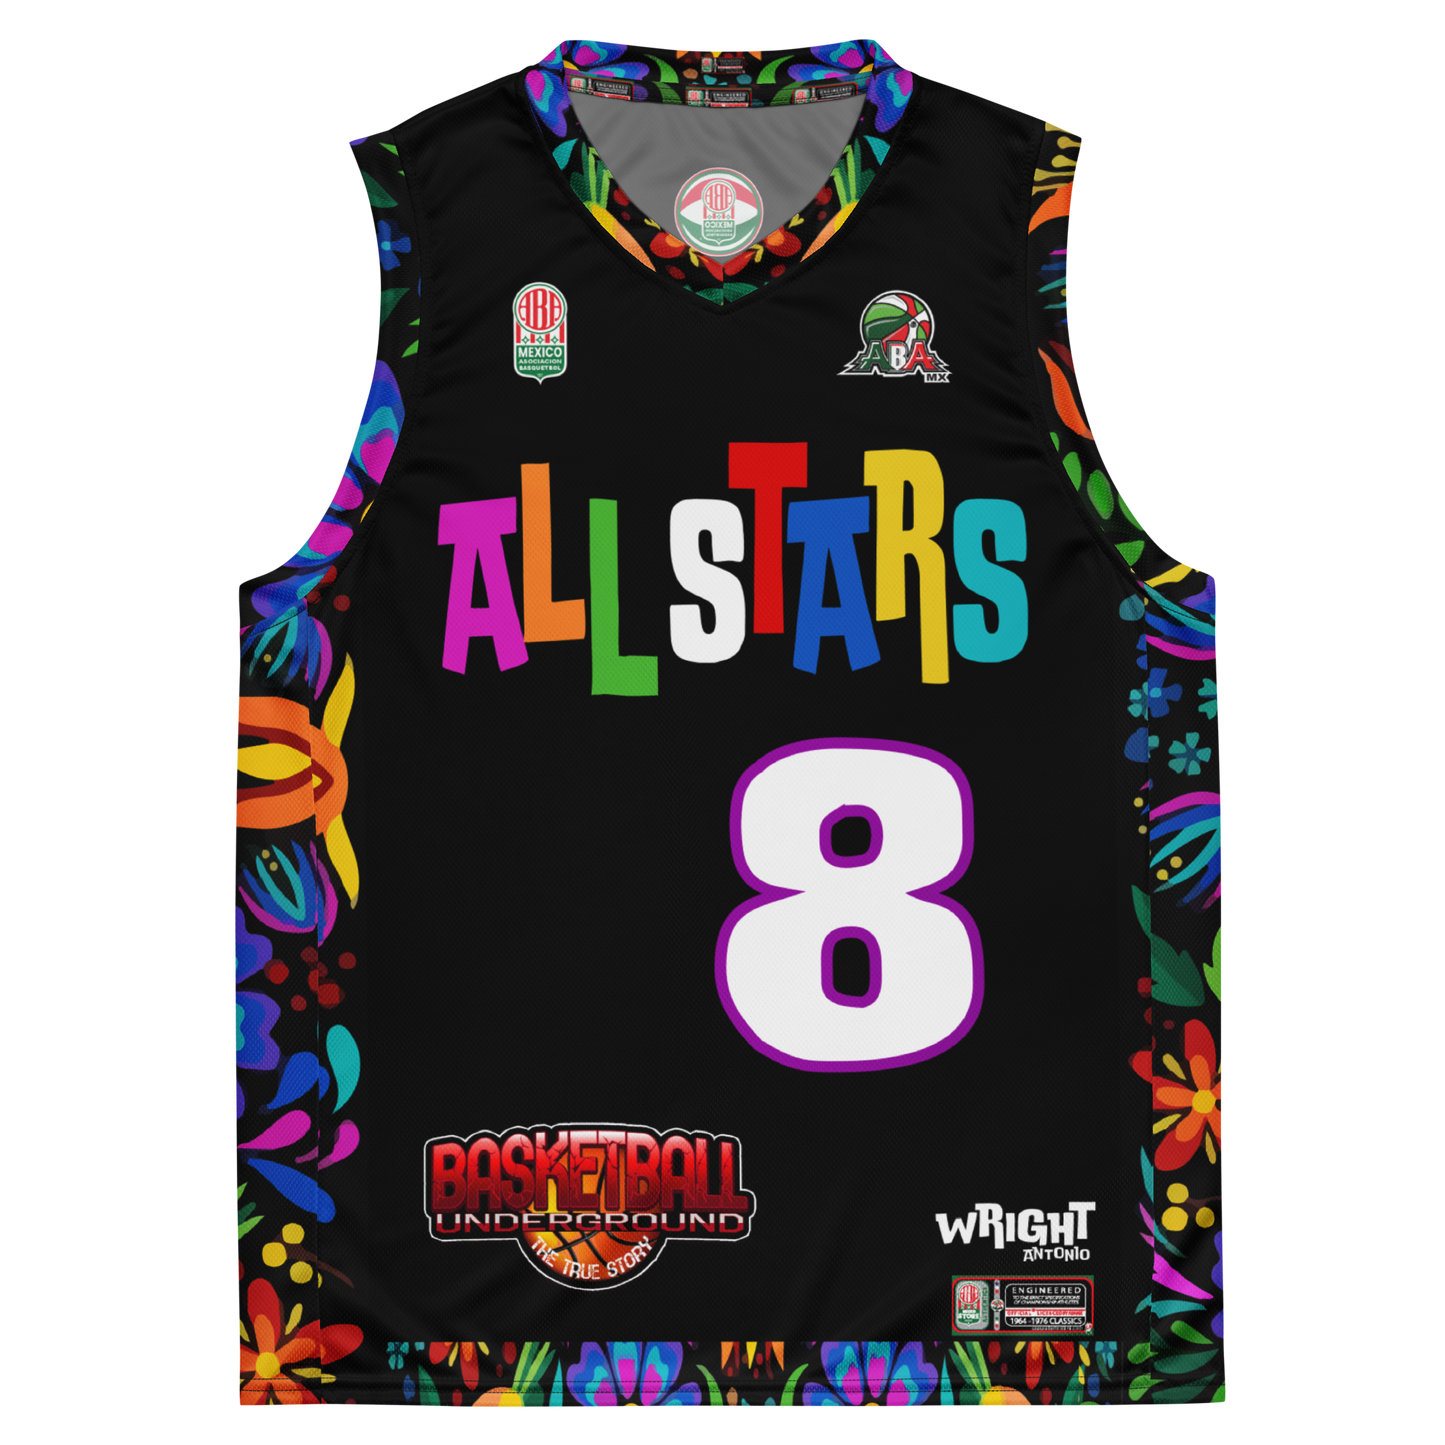 Limited Edition Antonio Wright #8 All-Star Jersey! 🌟🏀